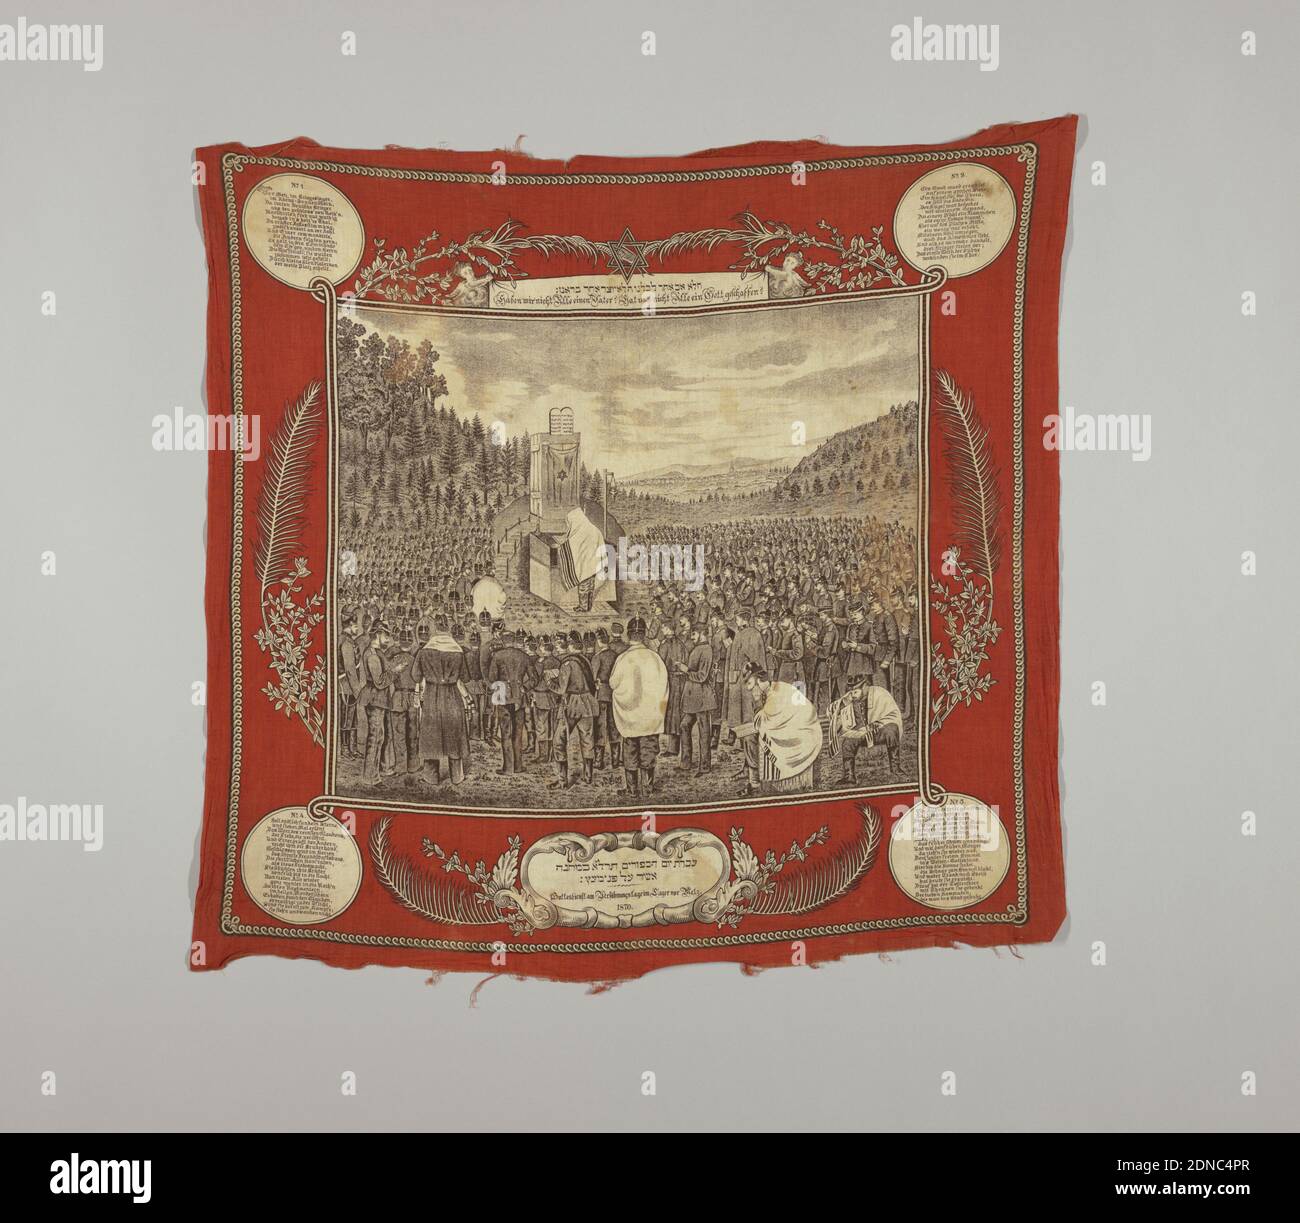 Commemorative scarf, Technique: printed by lithography, Scarf with central picture of a Jewish Kol Nidre ceremony on a corner of a battlefield. Individual regiments can be identified by numbers on the epaulettes. Text in Hebrew and German., France or Germany, 1870, printed, dyed & painted textiles, Commemorative scarf Stock Photo